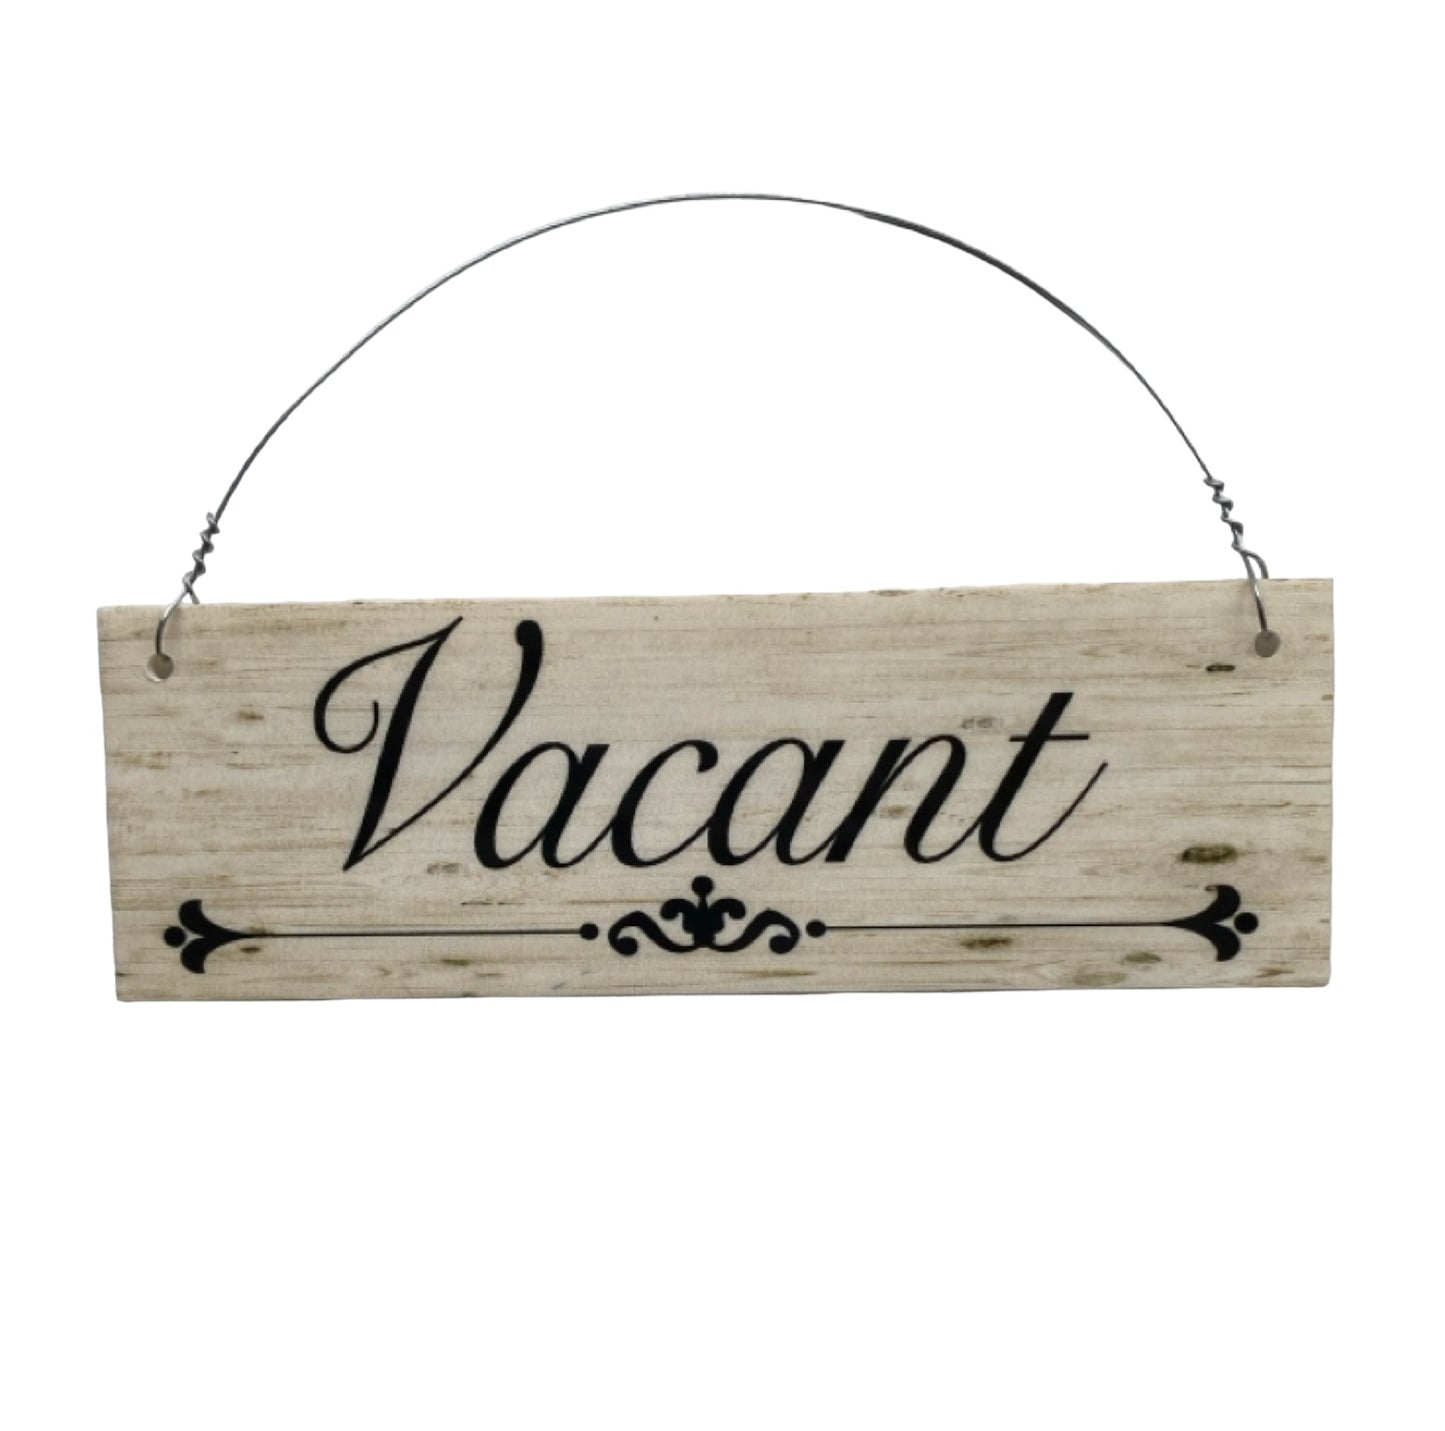 Vacant Engaged Toilet Bathroom Sign - The Renmy Store Homewares & Gifts 